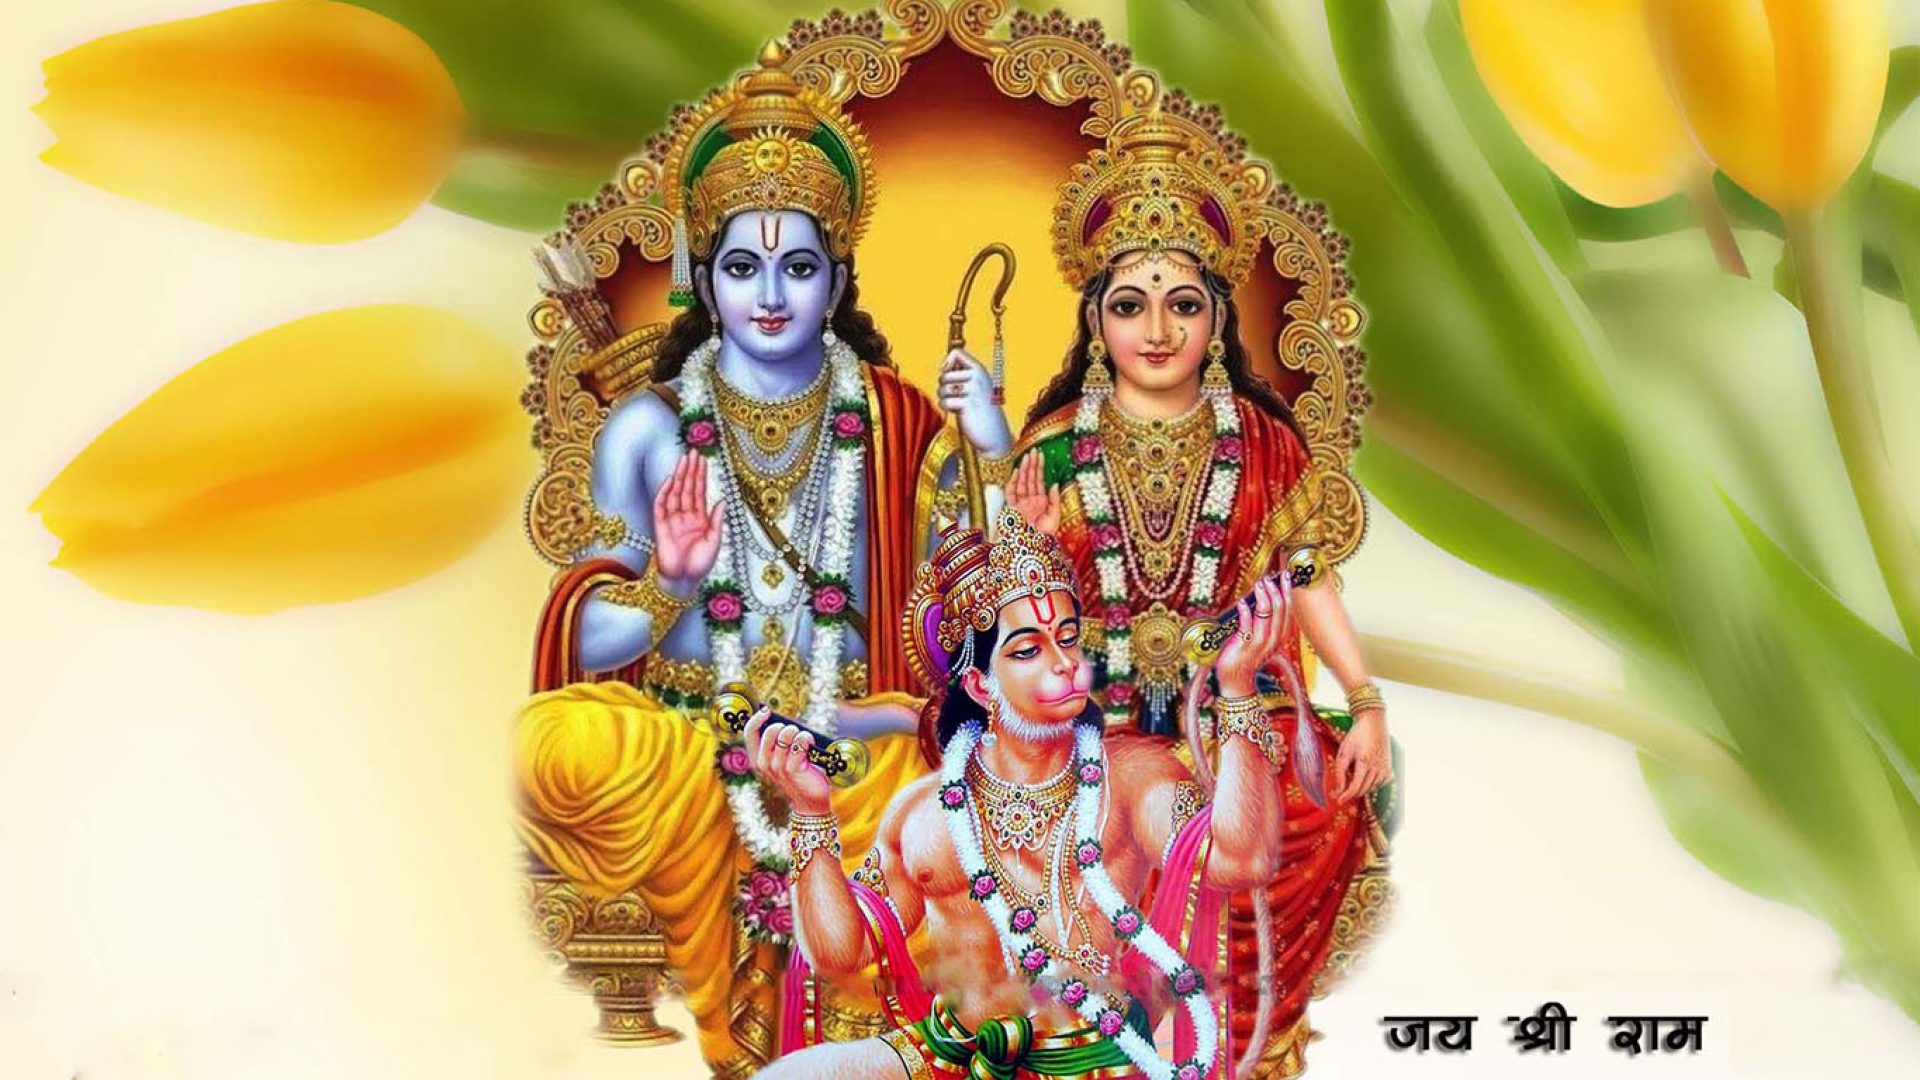 Lord Rama Hd Images Free Download 1 | Hindu Gods and Goddesses